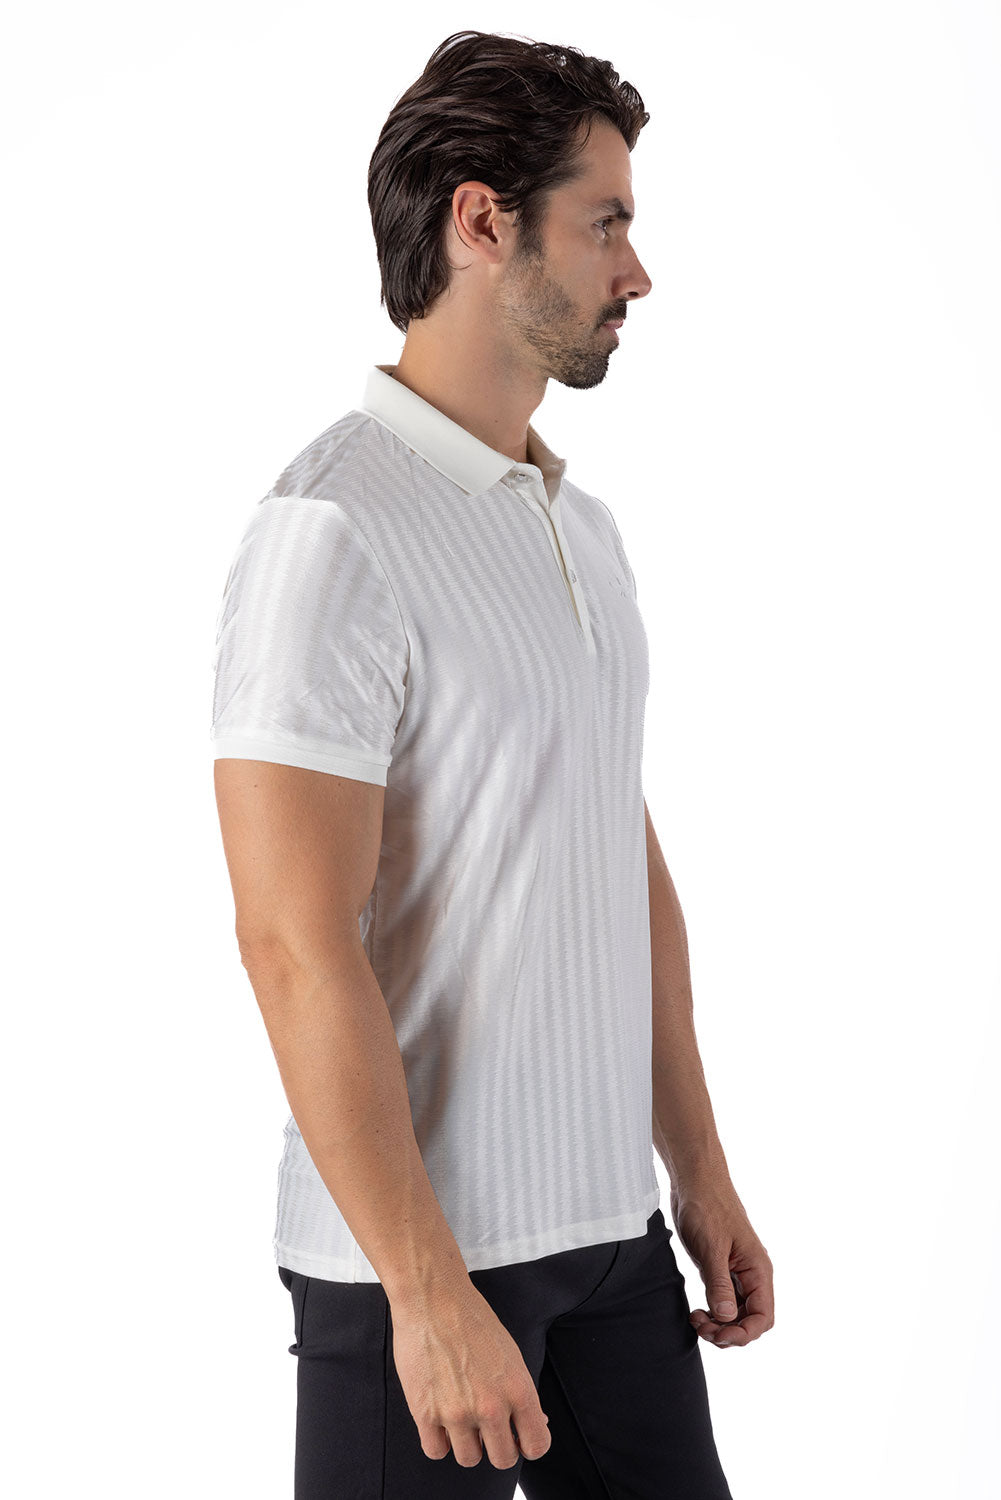 Barabas Men's Striped Solid Color Stretch Luxury Polo Shirts 4P30 White